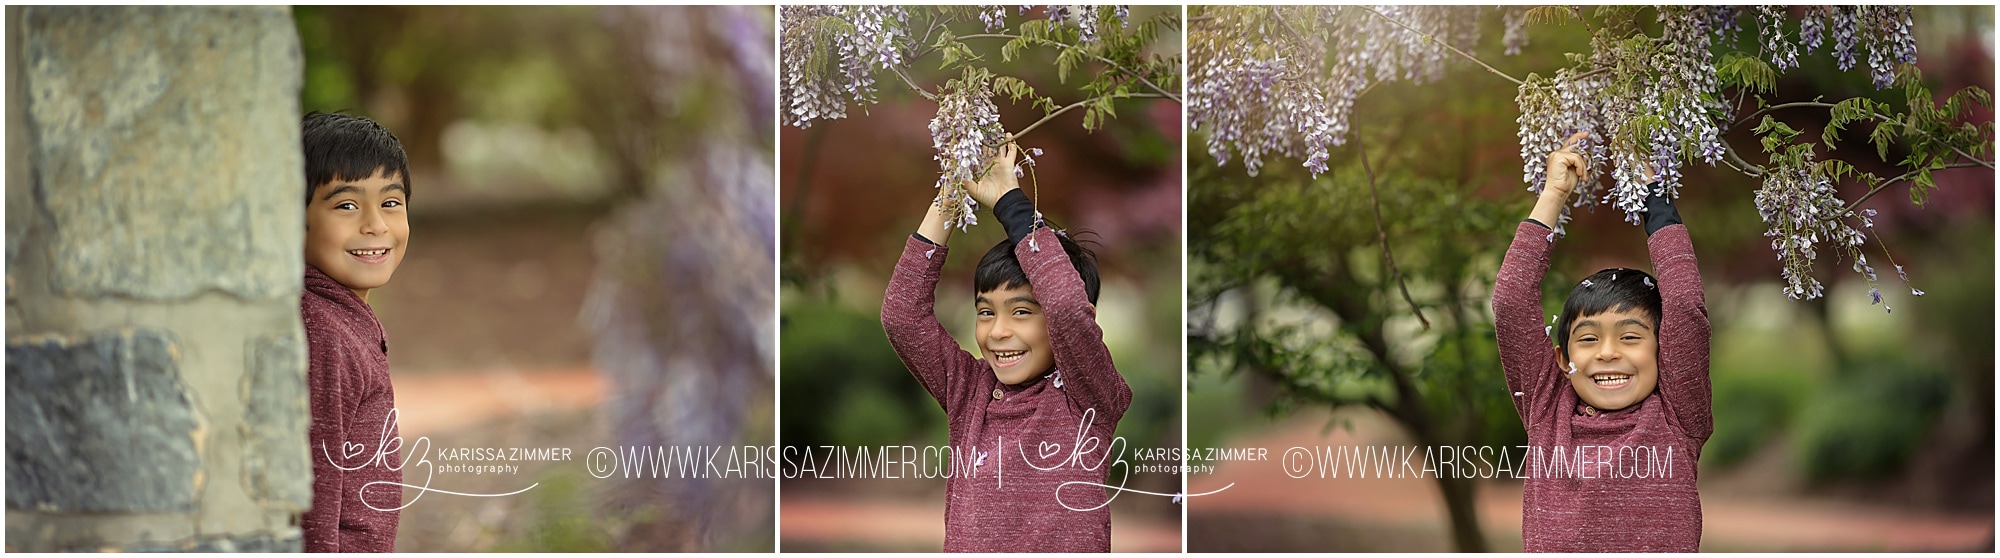 Child photographed with flowers near Hershey PA